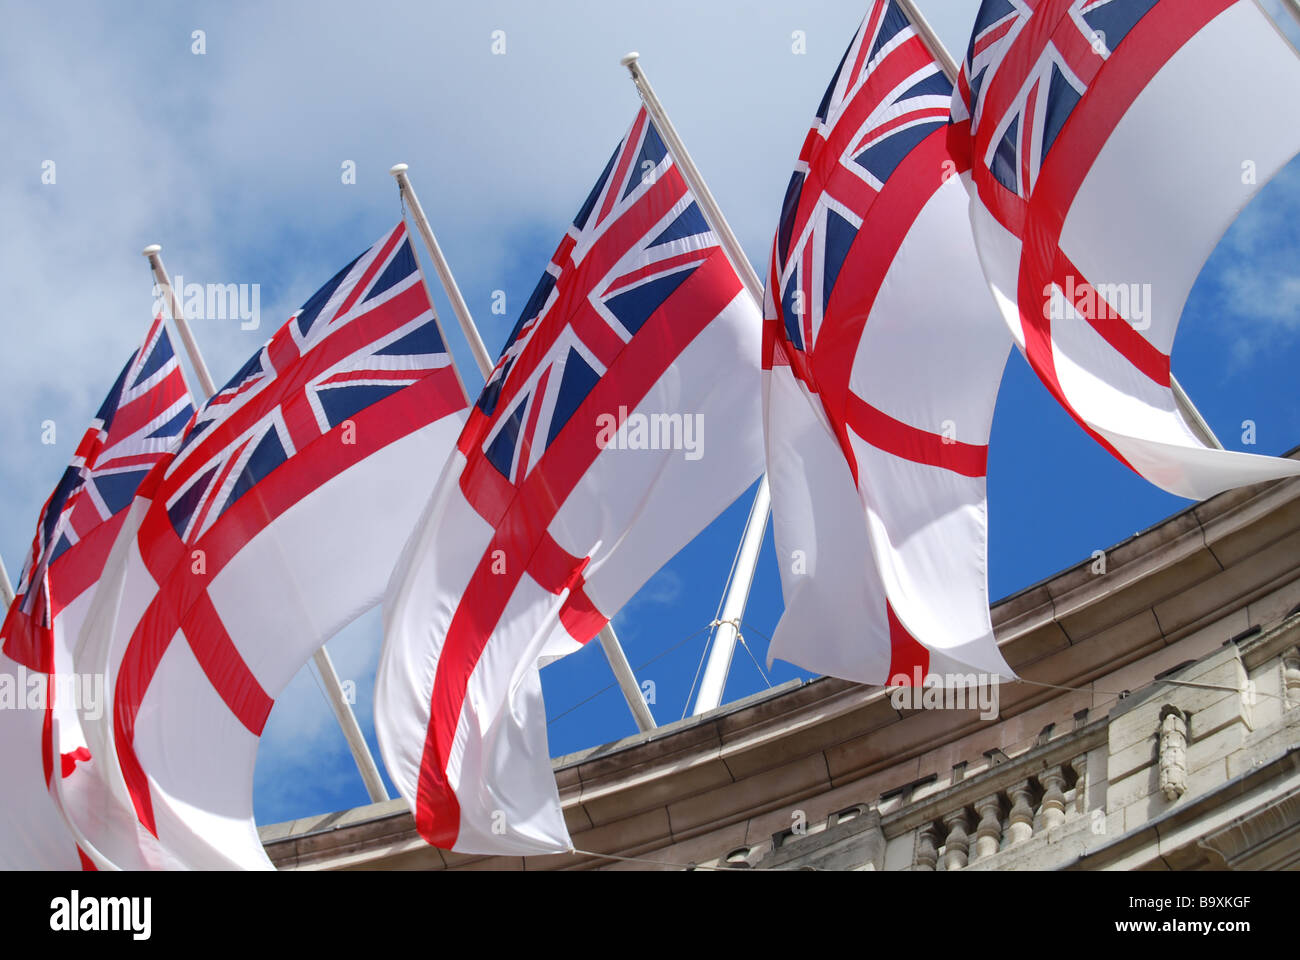 Flags white ensign red St George's Cross Stock Photo